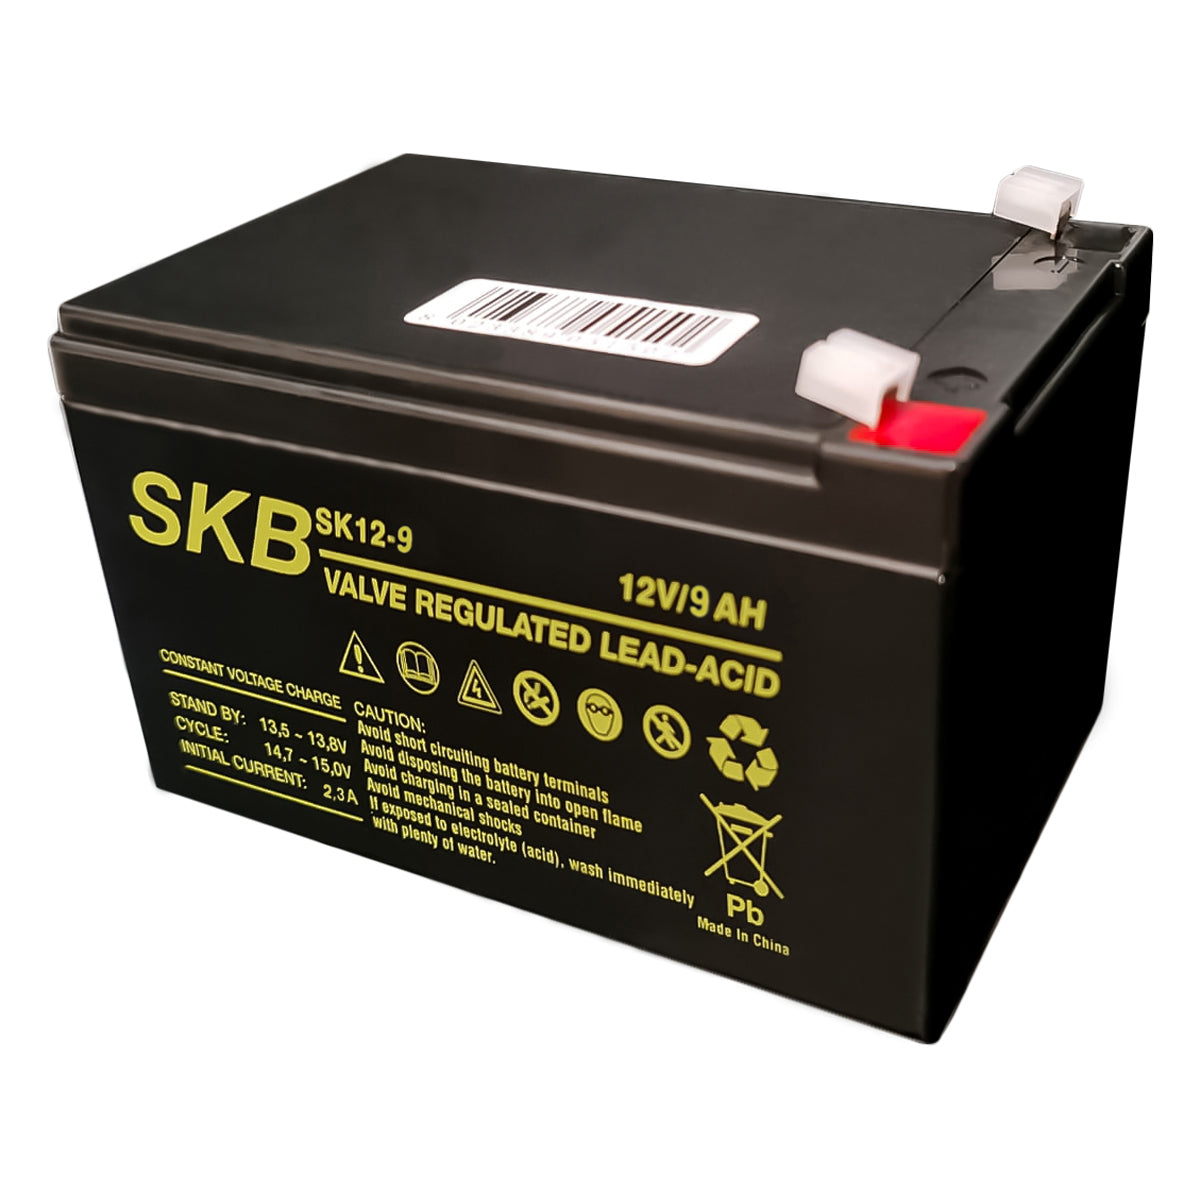 SKB SK12-9 lead acid battery, SK series 12V 9AH rechargeable battery, AGM flat plate technology regulated with valve